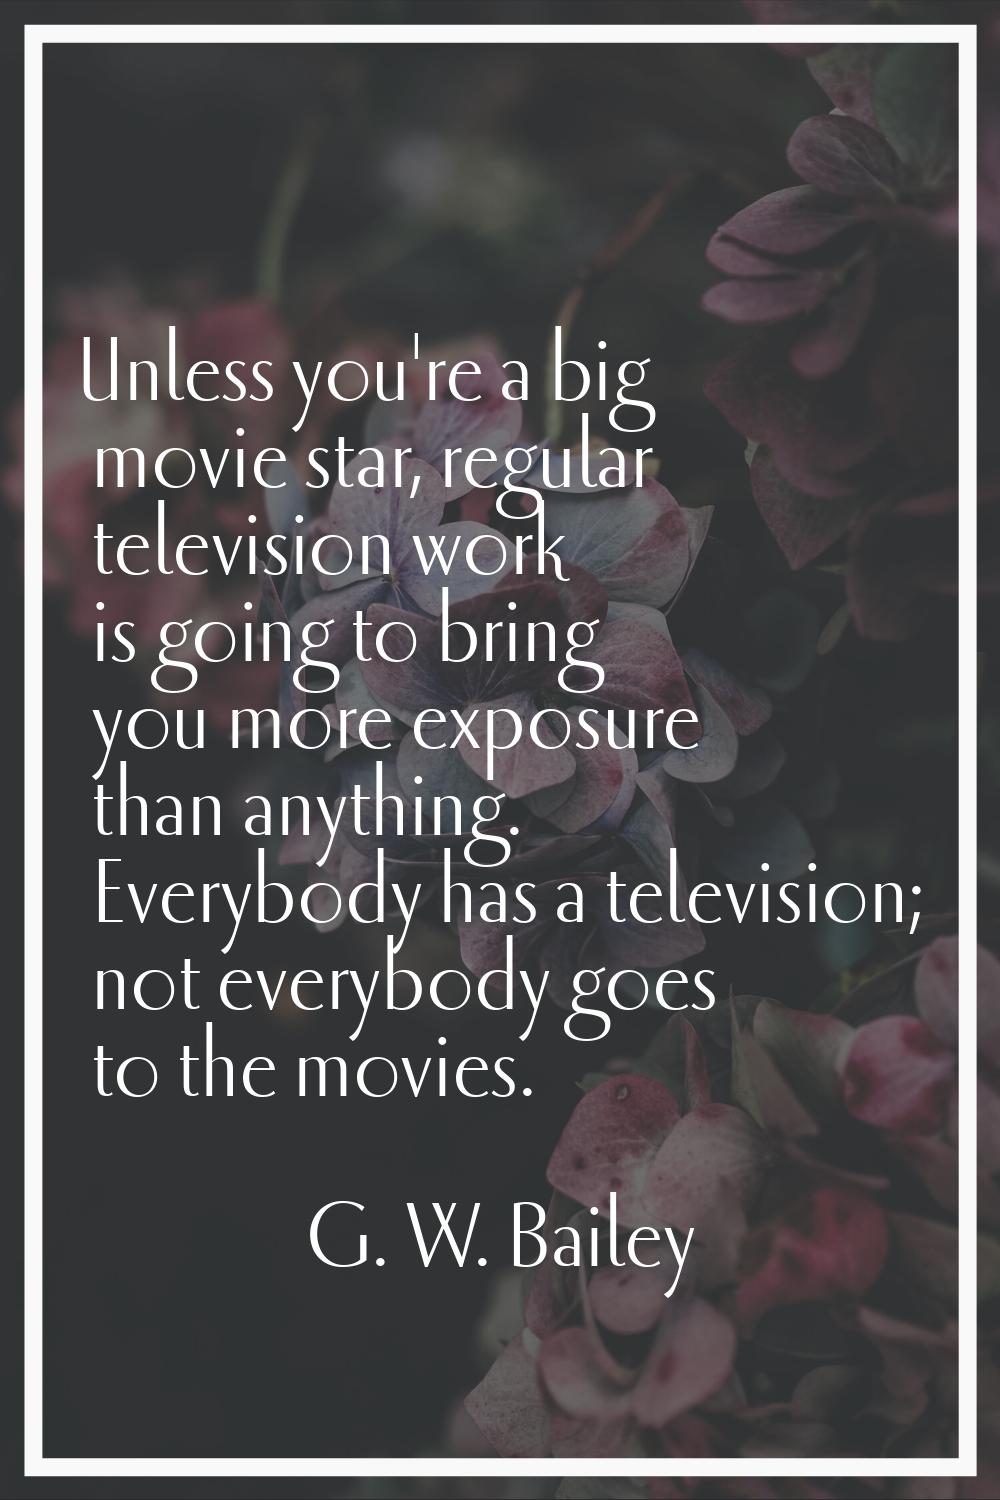 Unless you're a big movie star, regular television work is going to bring you more exposure than an